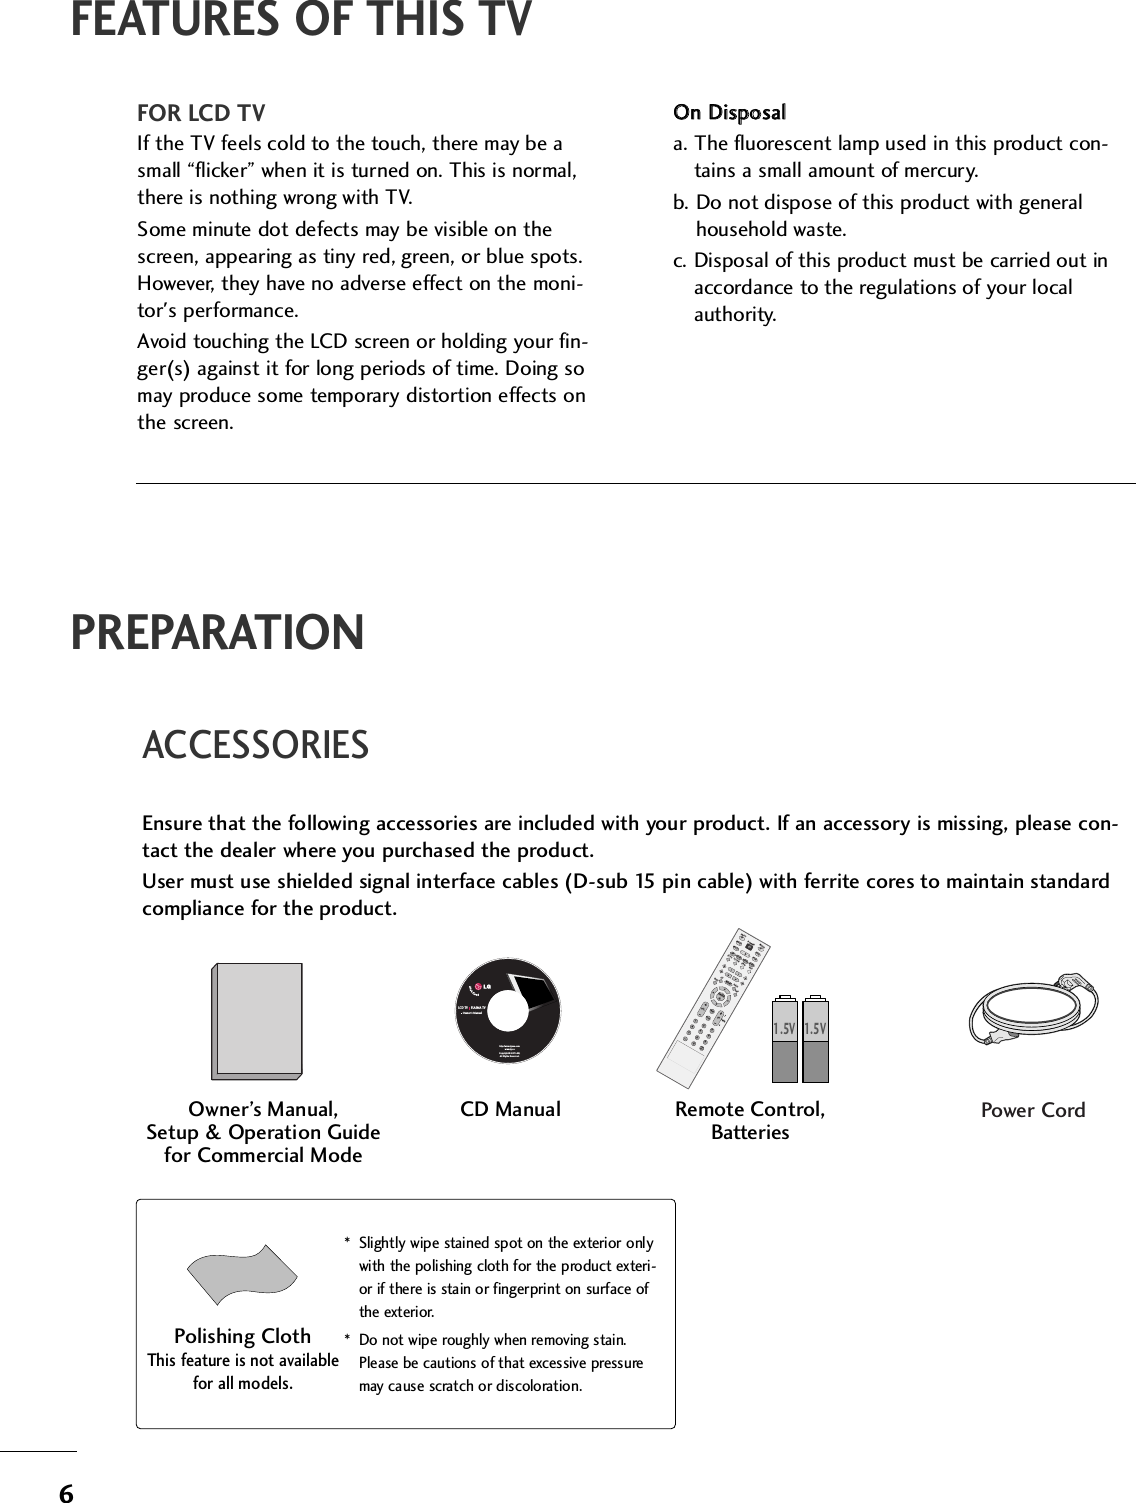 6PREPARATIONACCESSORIESEnsure that the following accessories are included with your product. If an accessory is missing, please con-tact the dealer where you purchased the product. User must use shielded signal interface cables (D-sub 15 pin cable) with ferrite cores to maintain standardcompliance for the product.Owner’s Manual, Setup &amp; Operation Guidefor Commercial ModeENTER TVINPUT  MODEDVDMULTIEXITOLEZ SOUNDINFOSWAPEZ PICTIMERMUTECHSAPCCRATIOMENUVCRPOWER2369PIPPIP CH - PIP CH +PIP INPUTENTER TVTVINPUT  INPUT MODEDVDMULTIEXITVOLEZ SOUNDINFOSWAPEZ PICTIMERMUTECHSAPCCRATIOMENUVCRPOWER1234567890FLASHBACKPIPPIP CH - PIP CH +PIP INPUTPAGEPAGERemote Control,BatteriesPower CordFEATURES OF THIS TVFOR LCD TVIf the TV feels cold to the touch, there may be asmall “flicker” when it is turned on. This is normal,there is nothing wrong with TV.Some minute dot defects may be visible on thescreen, appearing as tiny red, green, or blue spots.However, they have no adverse effect on the moni-tor&apos;s performance.Avoid touching the LCD screen or holding your fin-ger(s) against it for long periods of time. Doing somay produce some temporary distortion effects onthe screen.OOnn  DDiissppoossaalla. The fluorescent lamp used in this product con-tains a small amount of mercury.b. Do not dispose of this product with generalhousehold waste.c. Disposal of this product must be carried out inaccordance to the regulations of your localauthority.CD ManualLCD TV    PLASMA TVOwner&apos;s Manualhttp://www.lgusa.comwww.lg.caCopyright© 2007 LGE,All Rights Reserved.1.5V 1.5V* Slightly wipe stained spot on the exterior onlywith the polishing cloth for the product exteri-or if there is stain or fingerprint on surface ofthe exterior.* Do not wipe roughly when removing stain.Please be cautions of that excessive pressuremay cause scratch or discoloration.Polishing ClothThis feature is not availablefor all models.